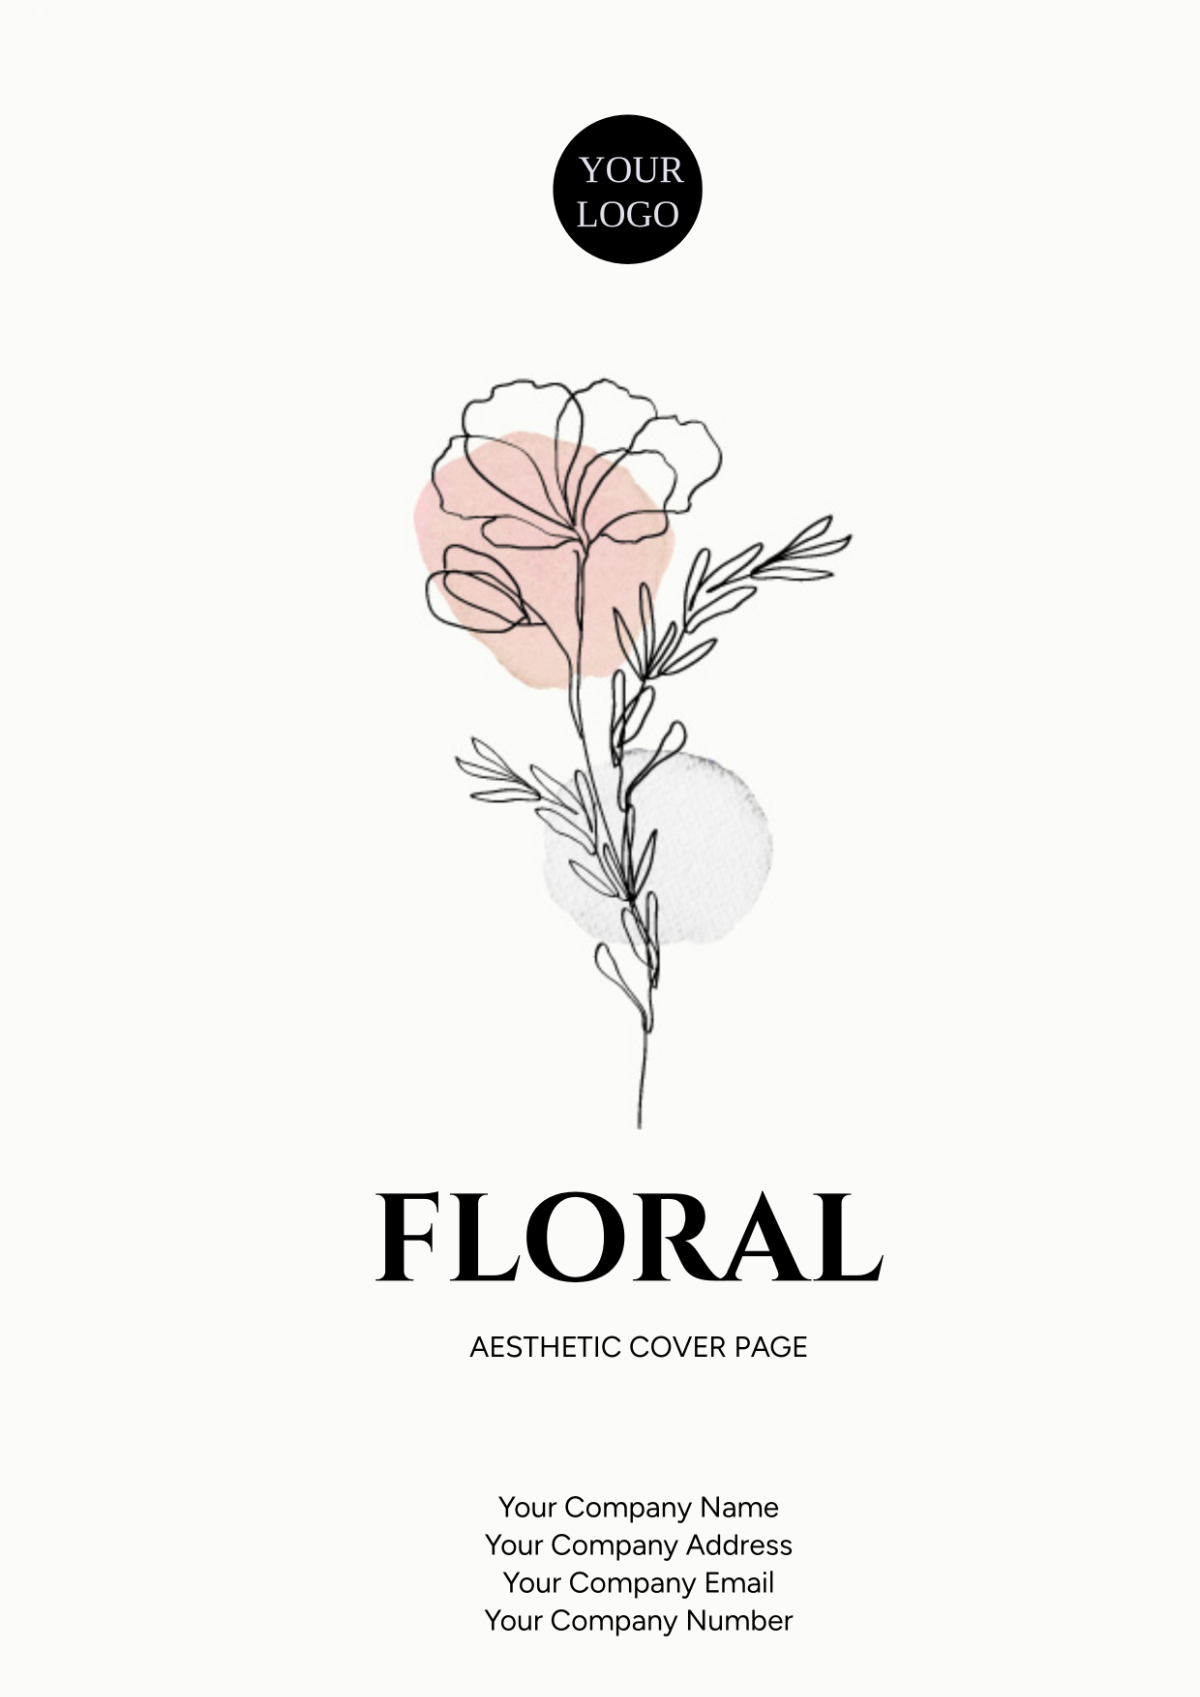 Floral Aesthetic Cover Page